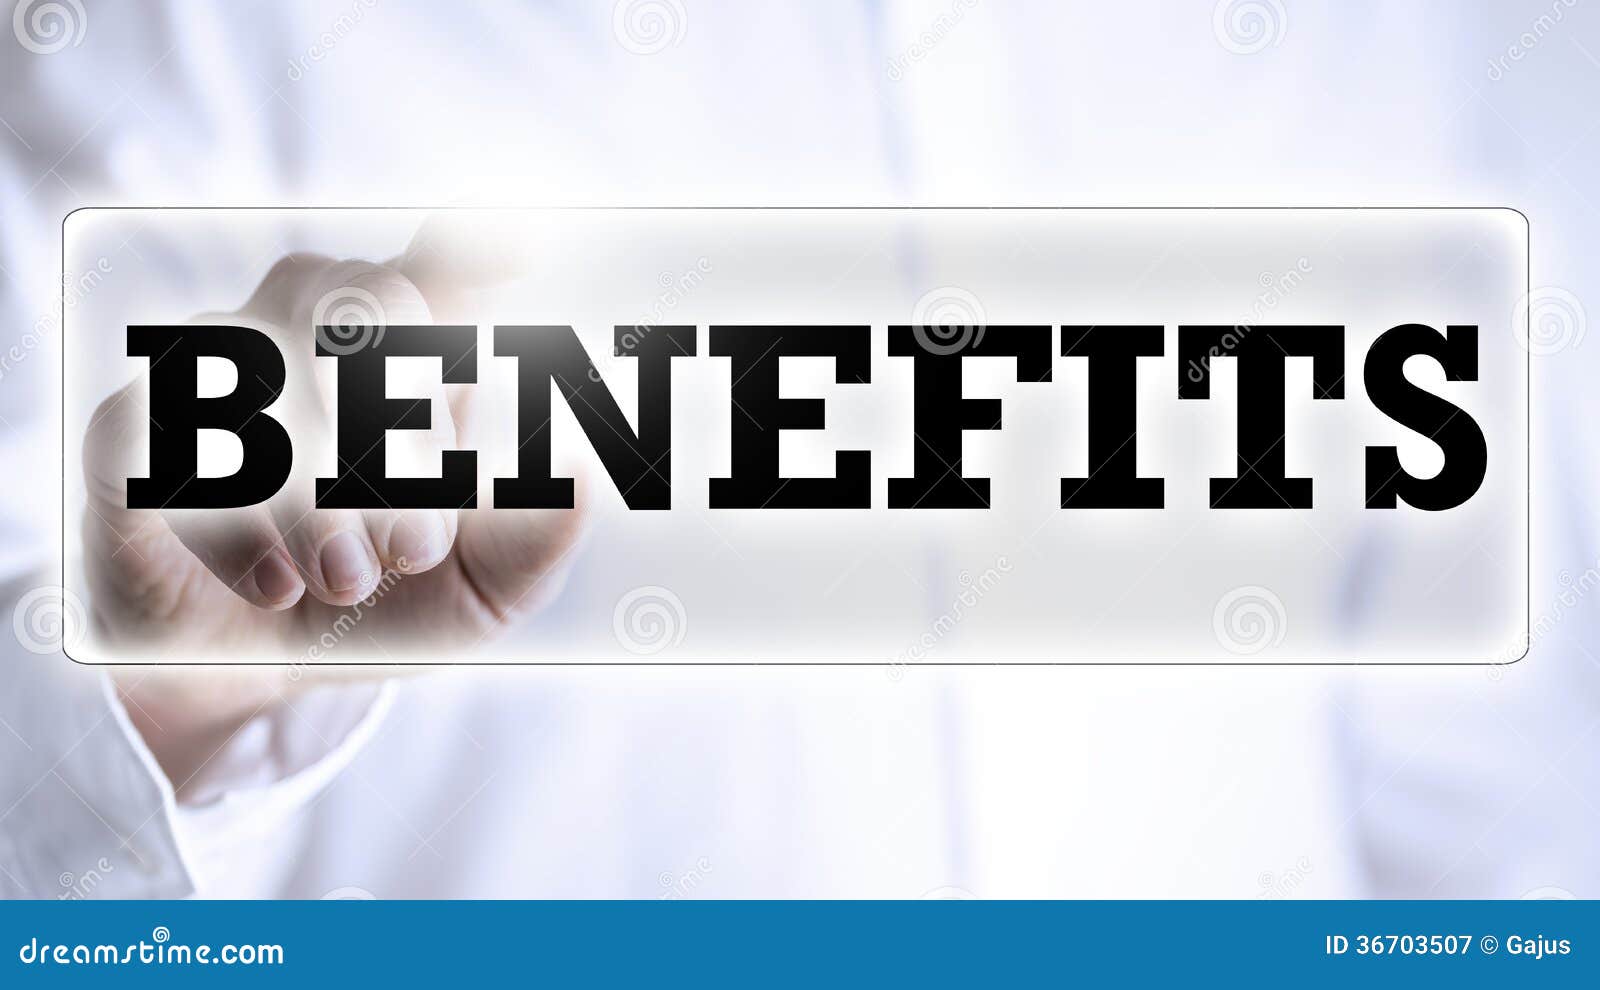 benefits in text on a virtual screen